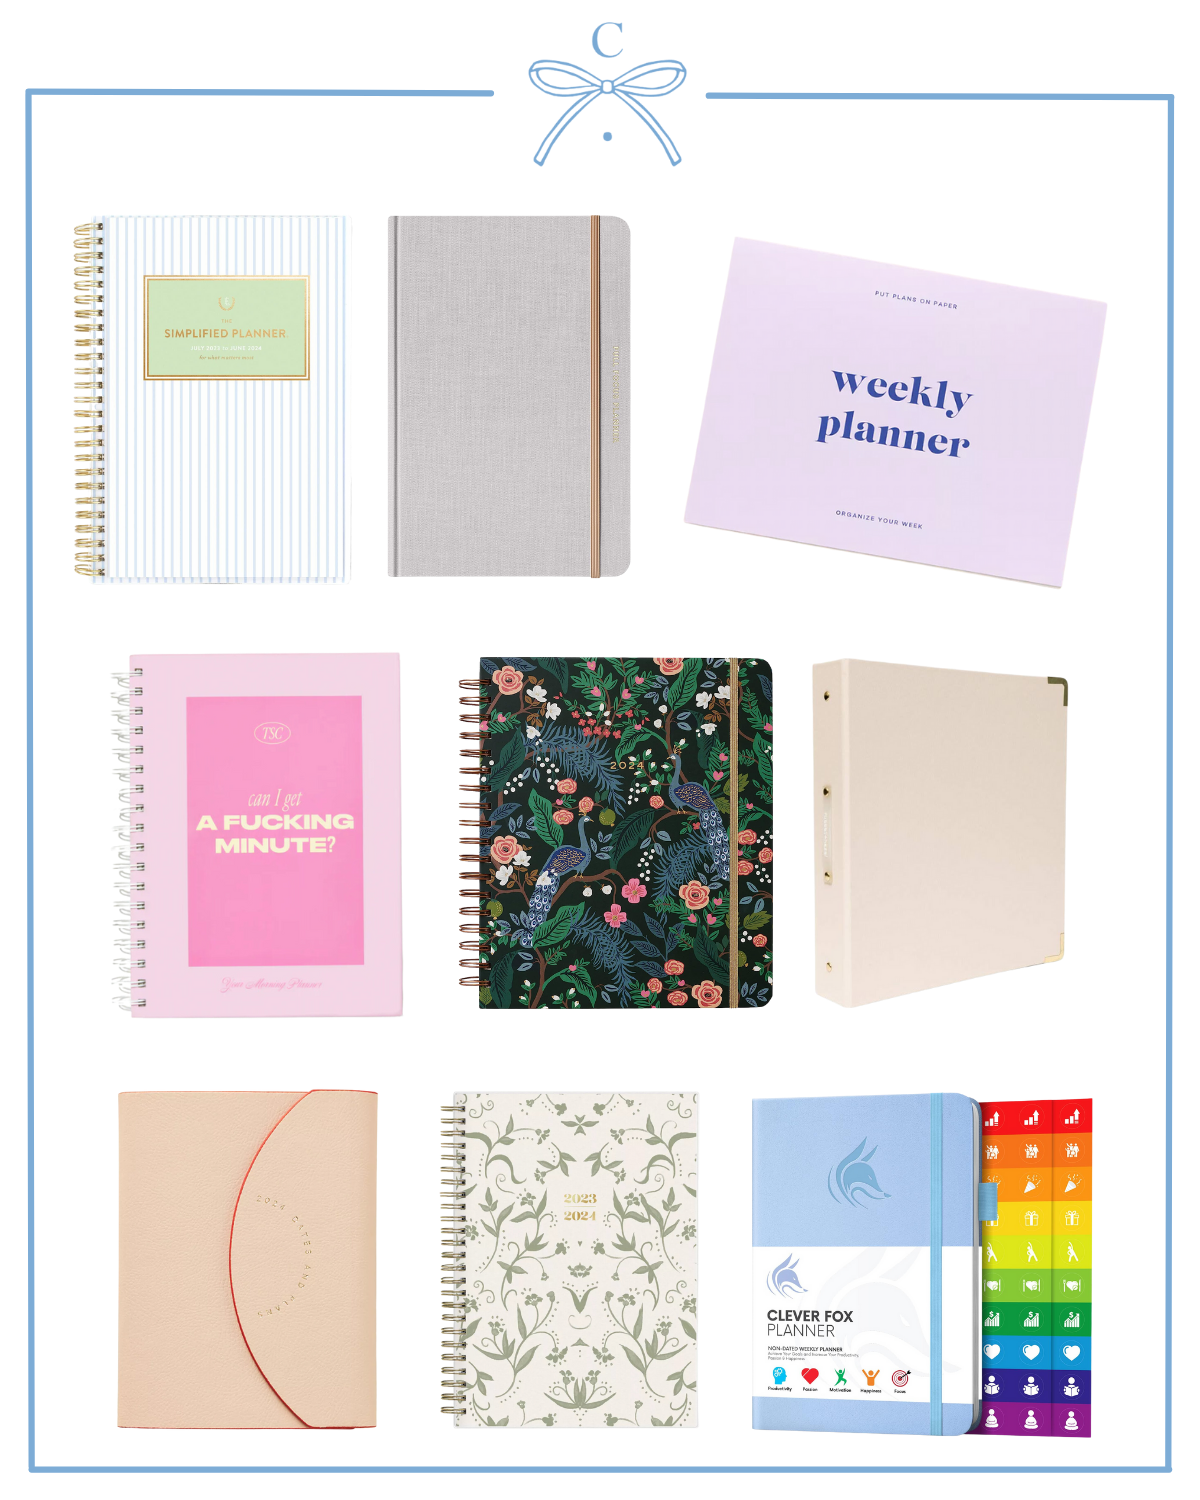 best planners simplified papier full focus the skinny confidential rifle paper co russel + hazel anthropologie day designer clever fox